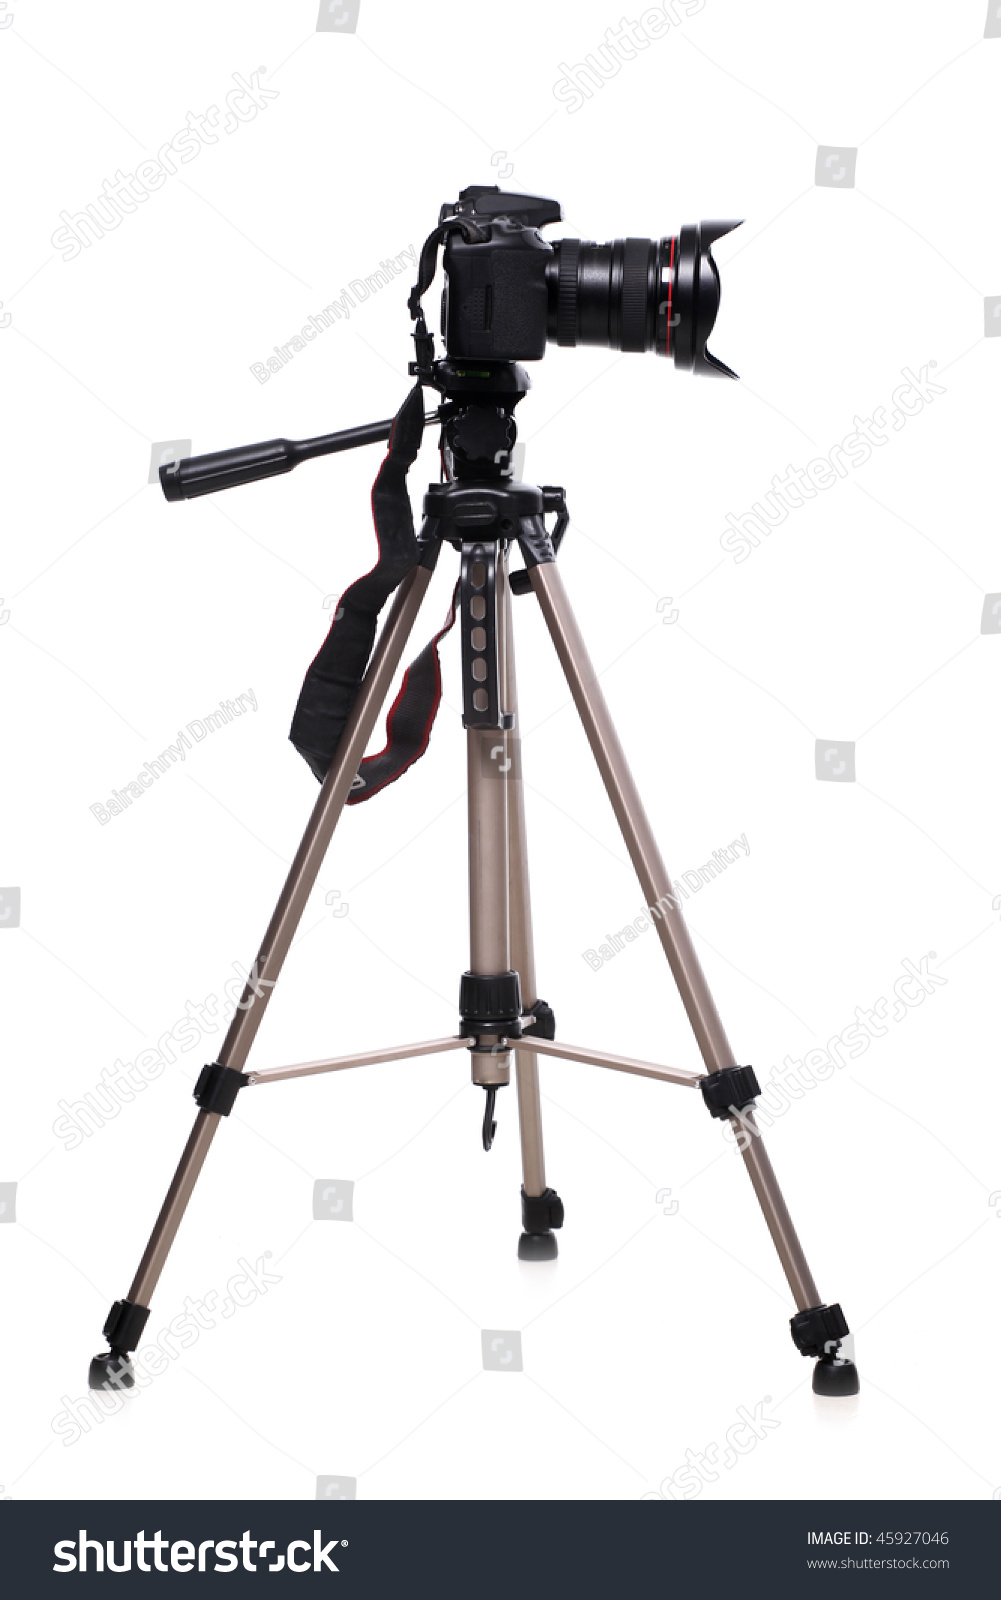 camera stand clipart - photo #11